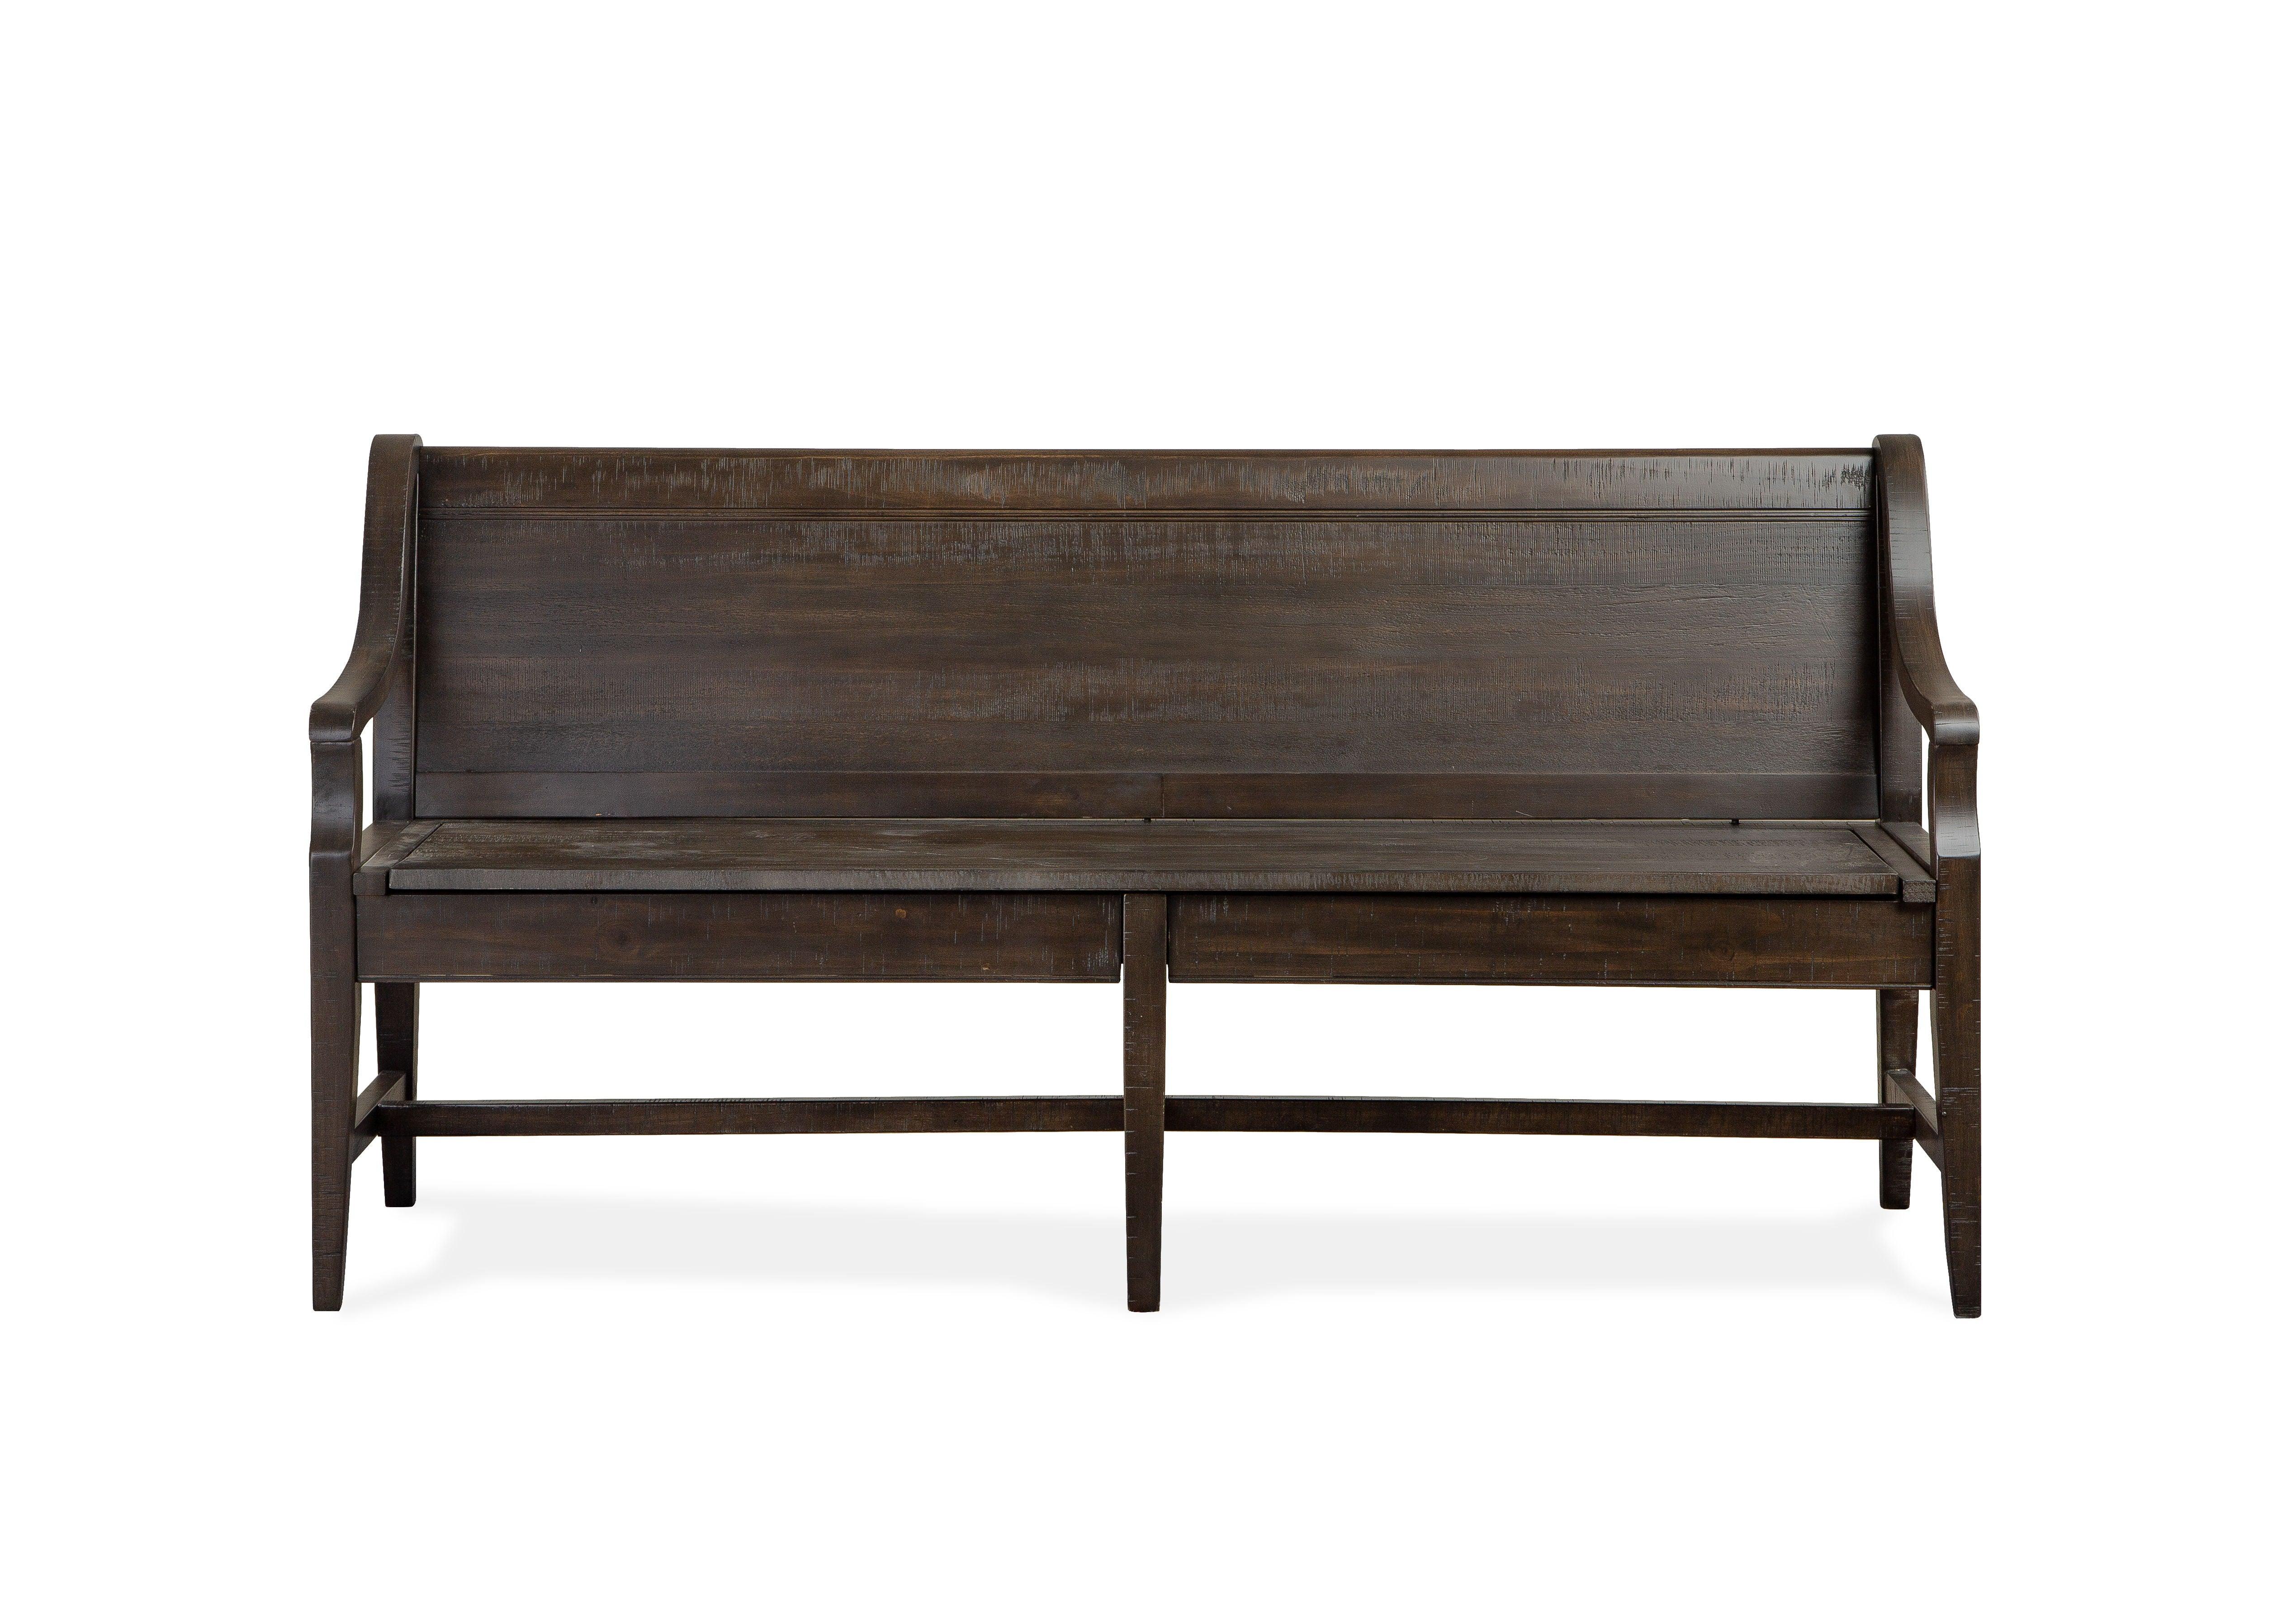 Magnussen Furniture - Westley Falls - Bench With Back - Graphite - 5th Avenue Furniture